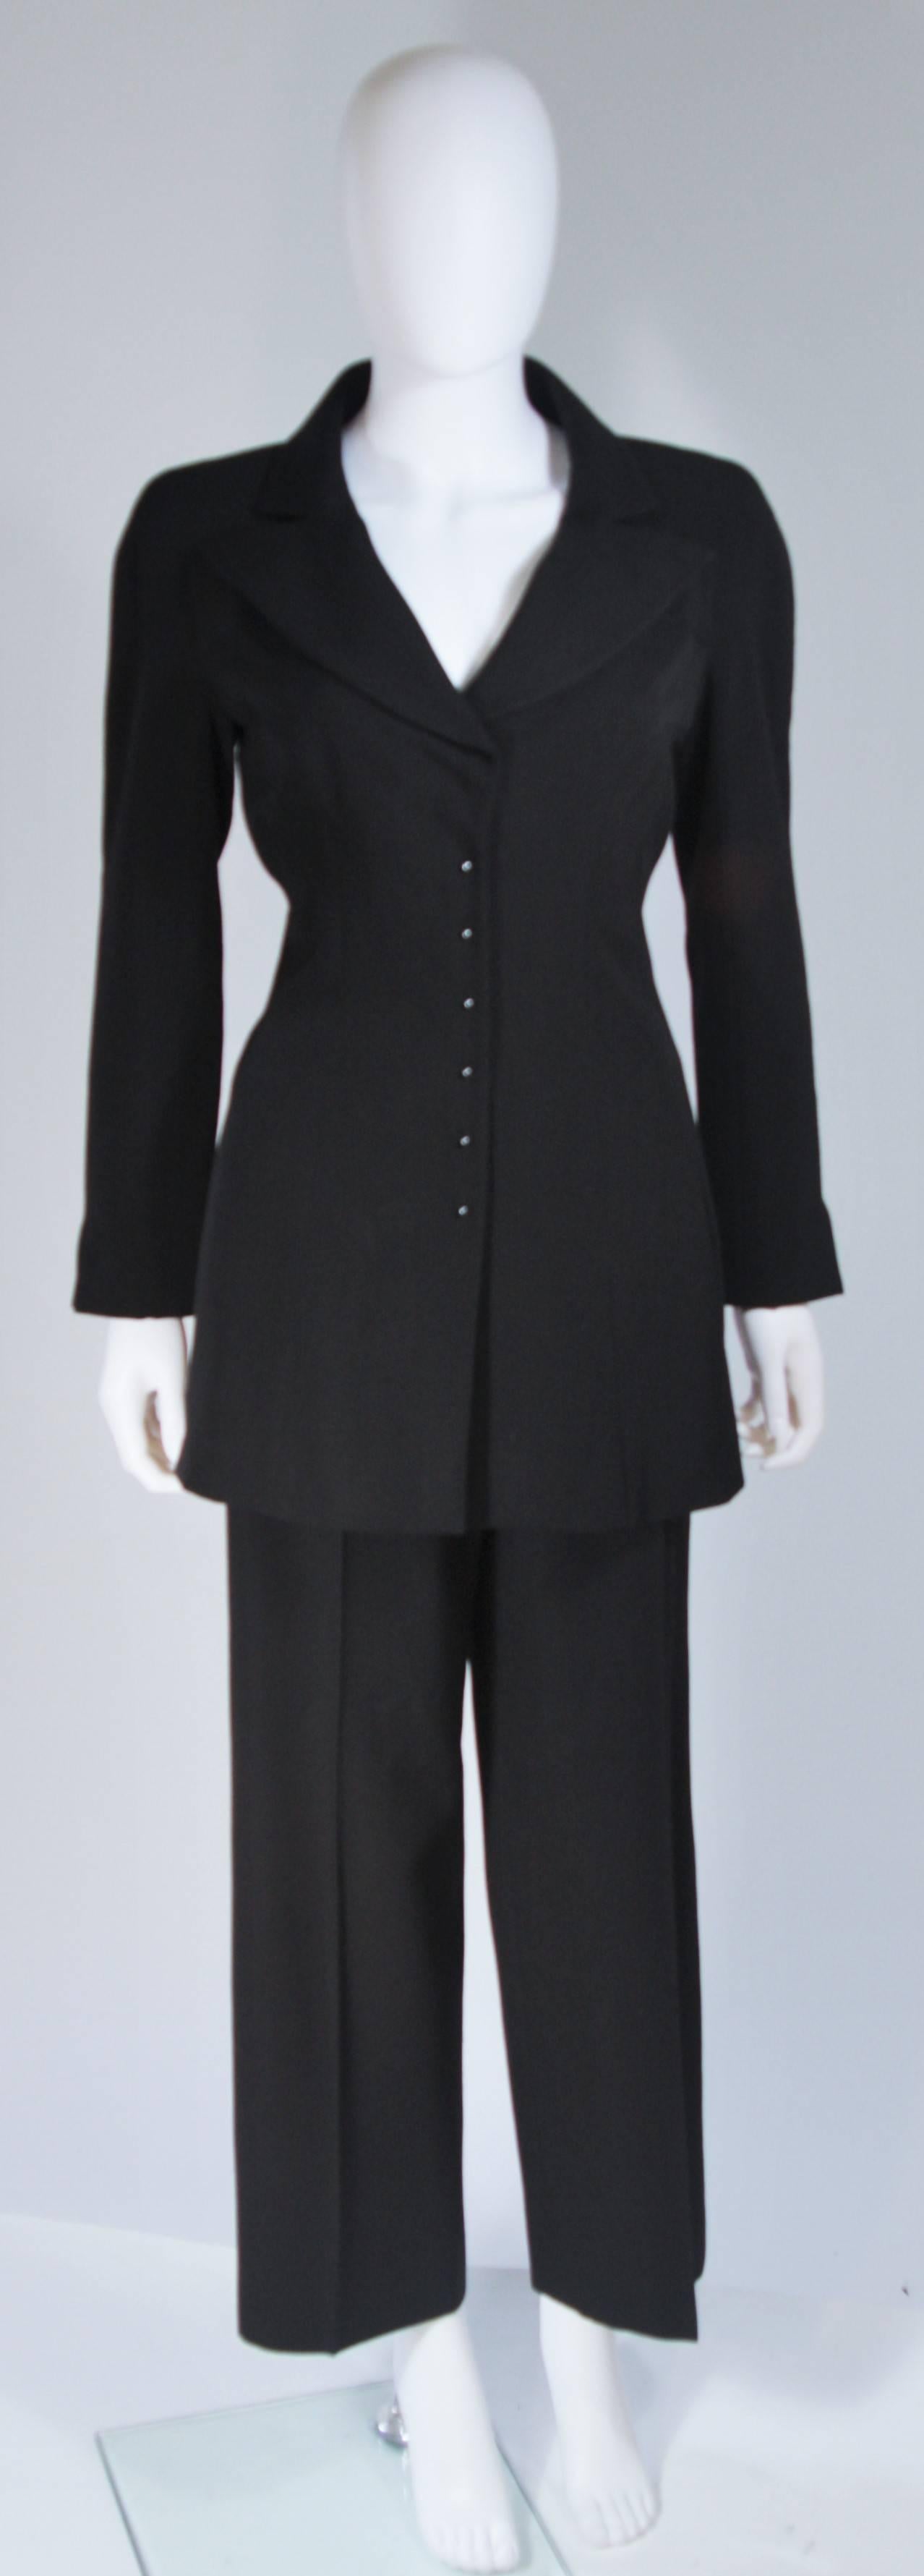  This Chanel pant suit is composed of a black blend fabric. The jacket features center front button closures and pockets. The pants feature a slack style with pressed front, center front zipper, and side pockets. In excellent condition. 

**Please